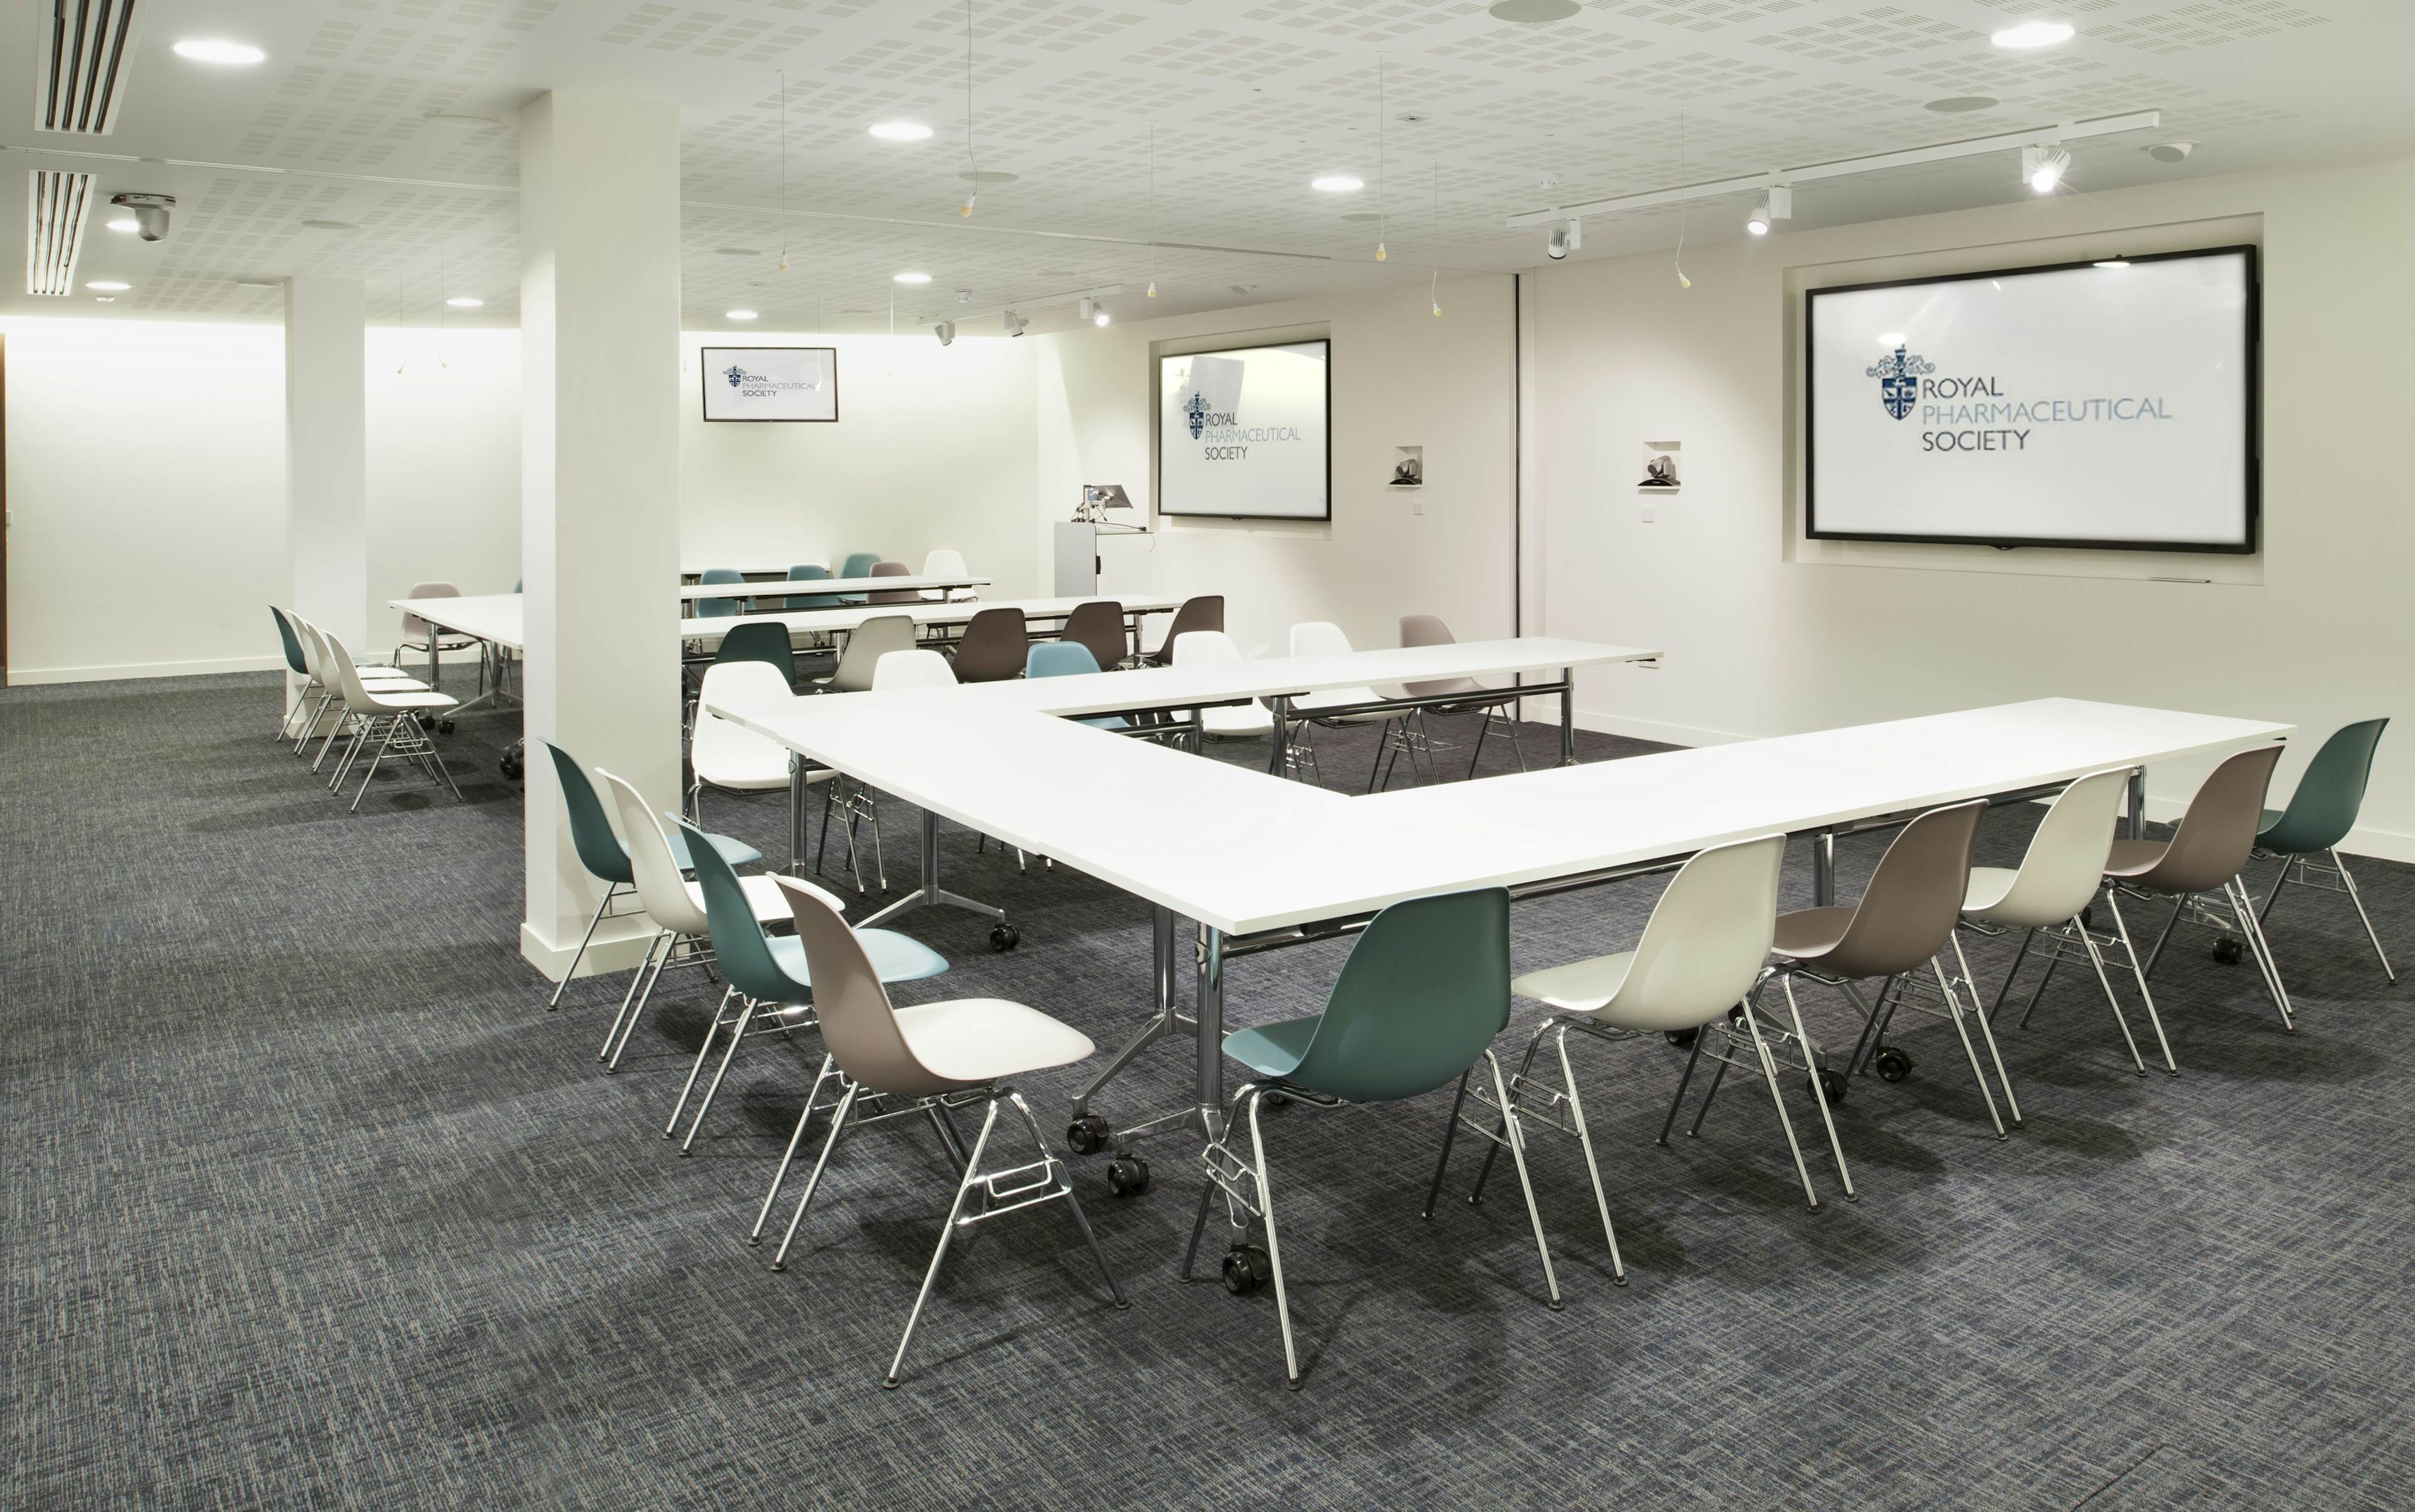 The Royal Pharmaceutical Society - RPS Suite image 1